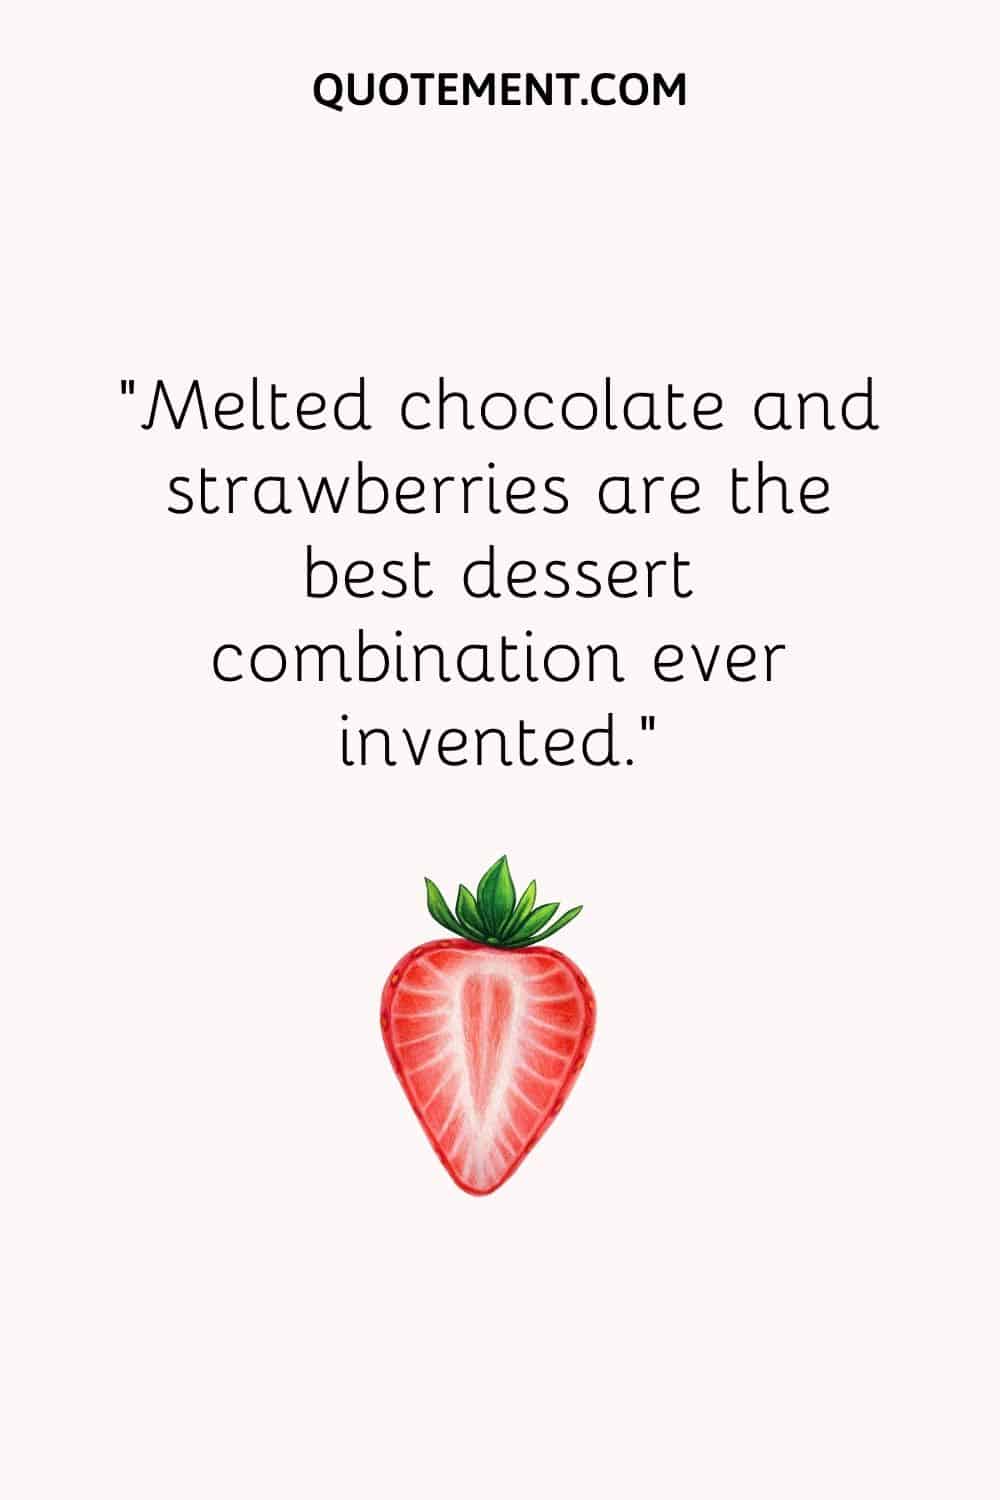 Melted chocolate and strawberries are the best dessert combination ever invented